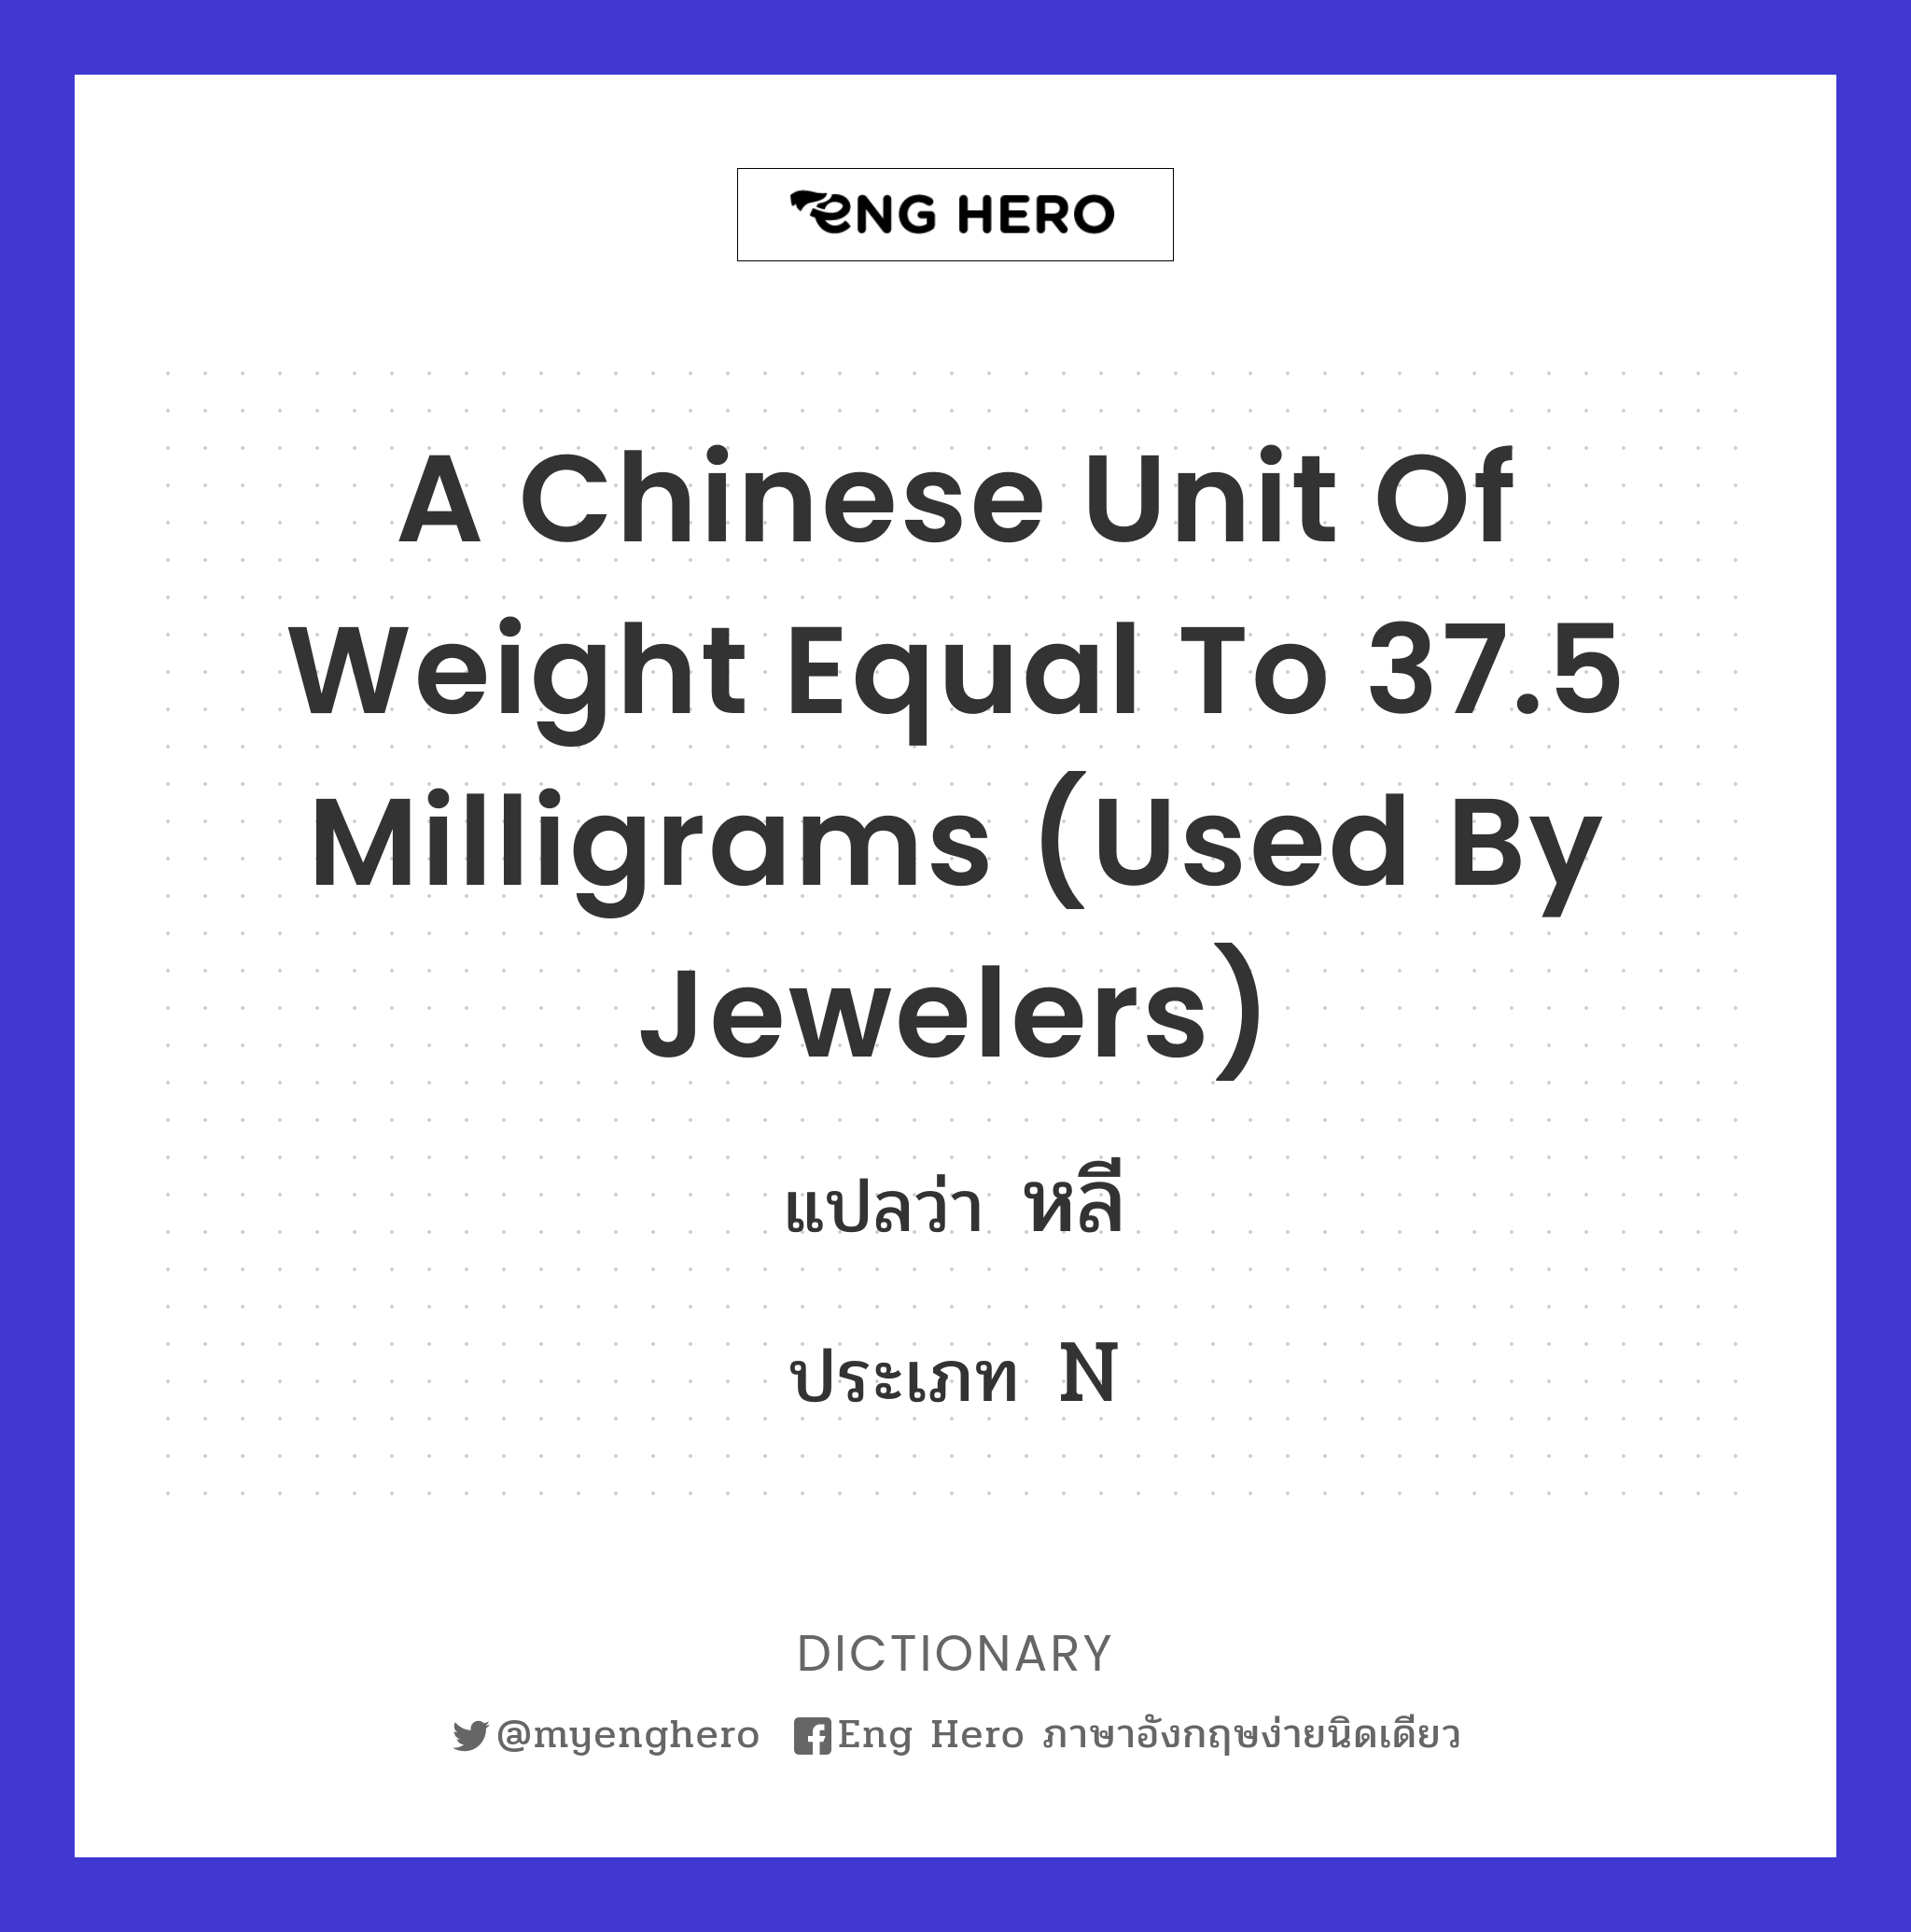 a Chinese unit of weight equal to 37.5 milligrams (used by jewelers)